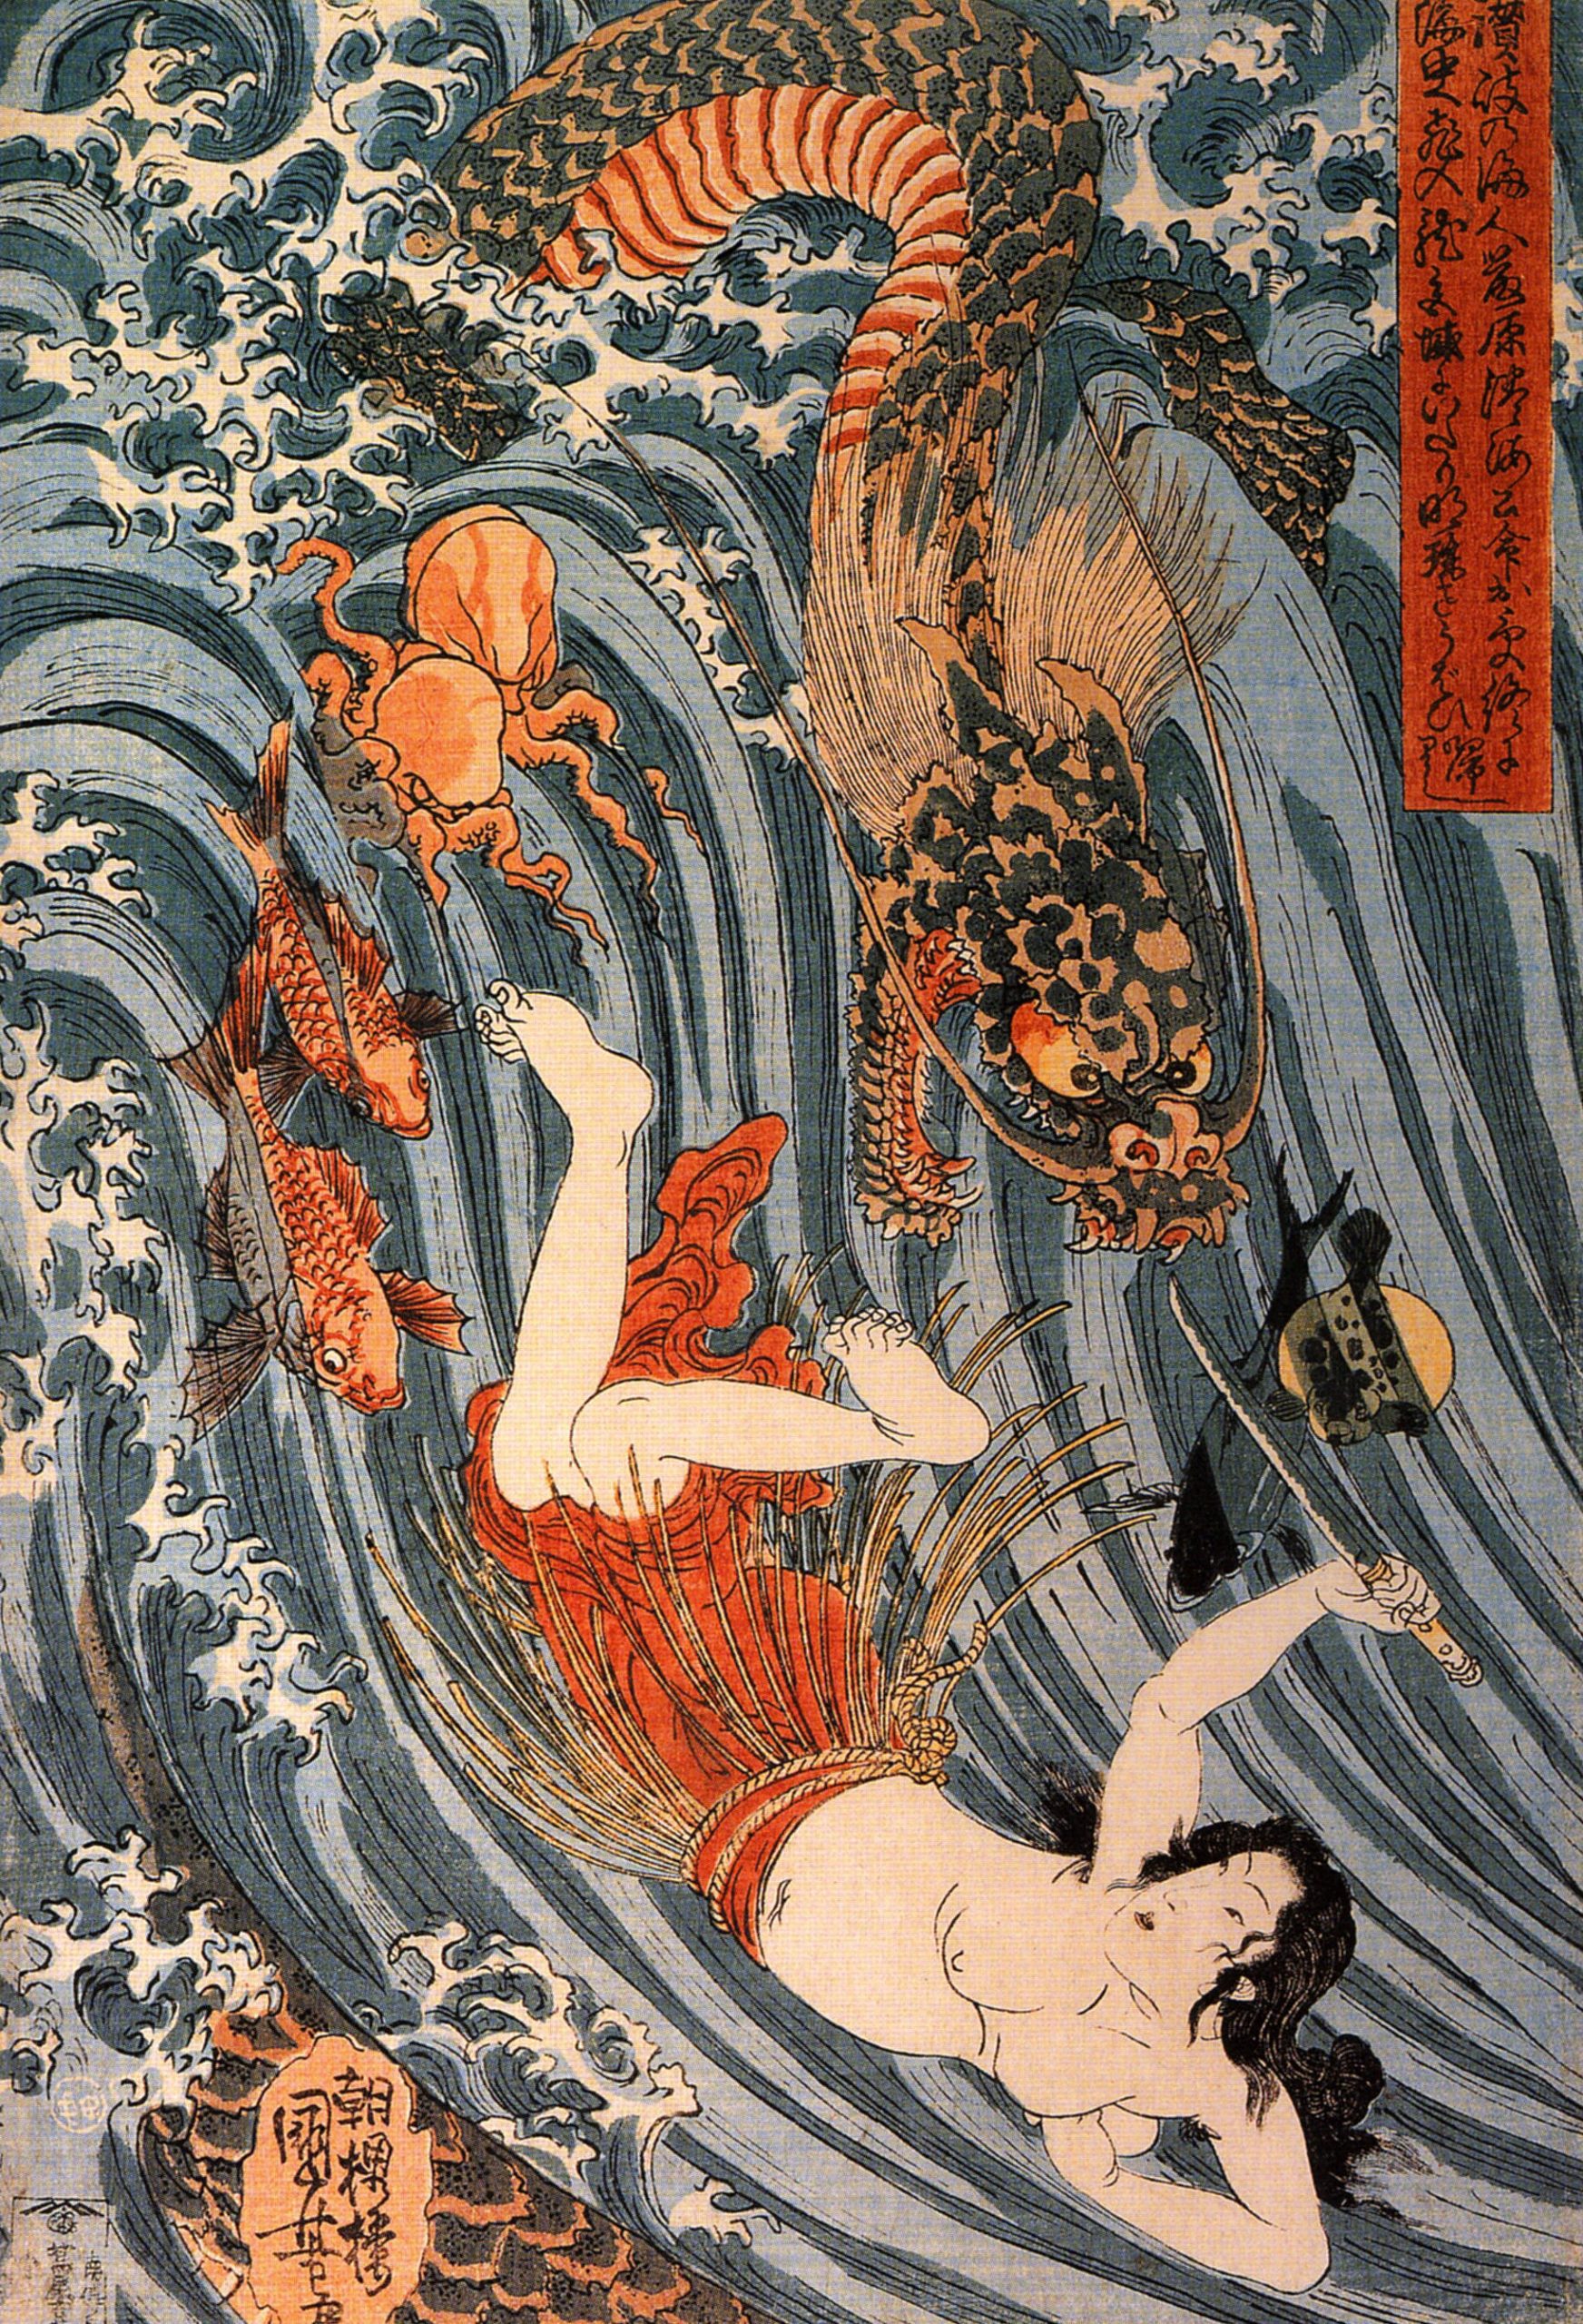 A princess holding a knife upwards at a dragon is sitting in the middle of a large wave.